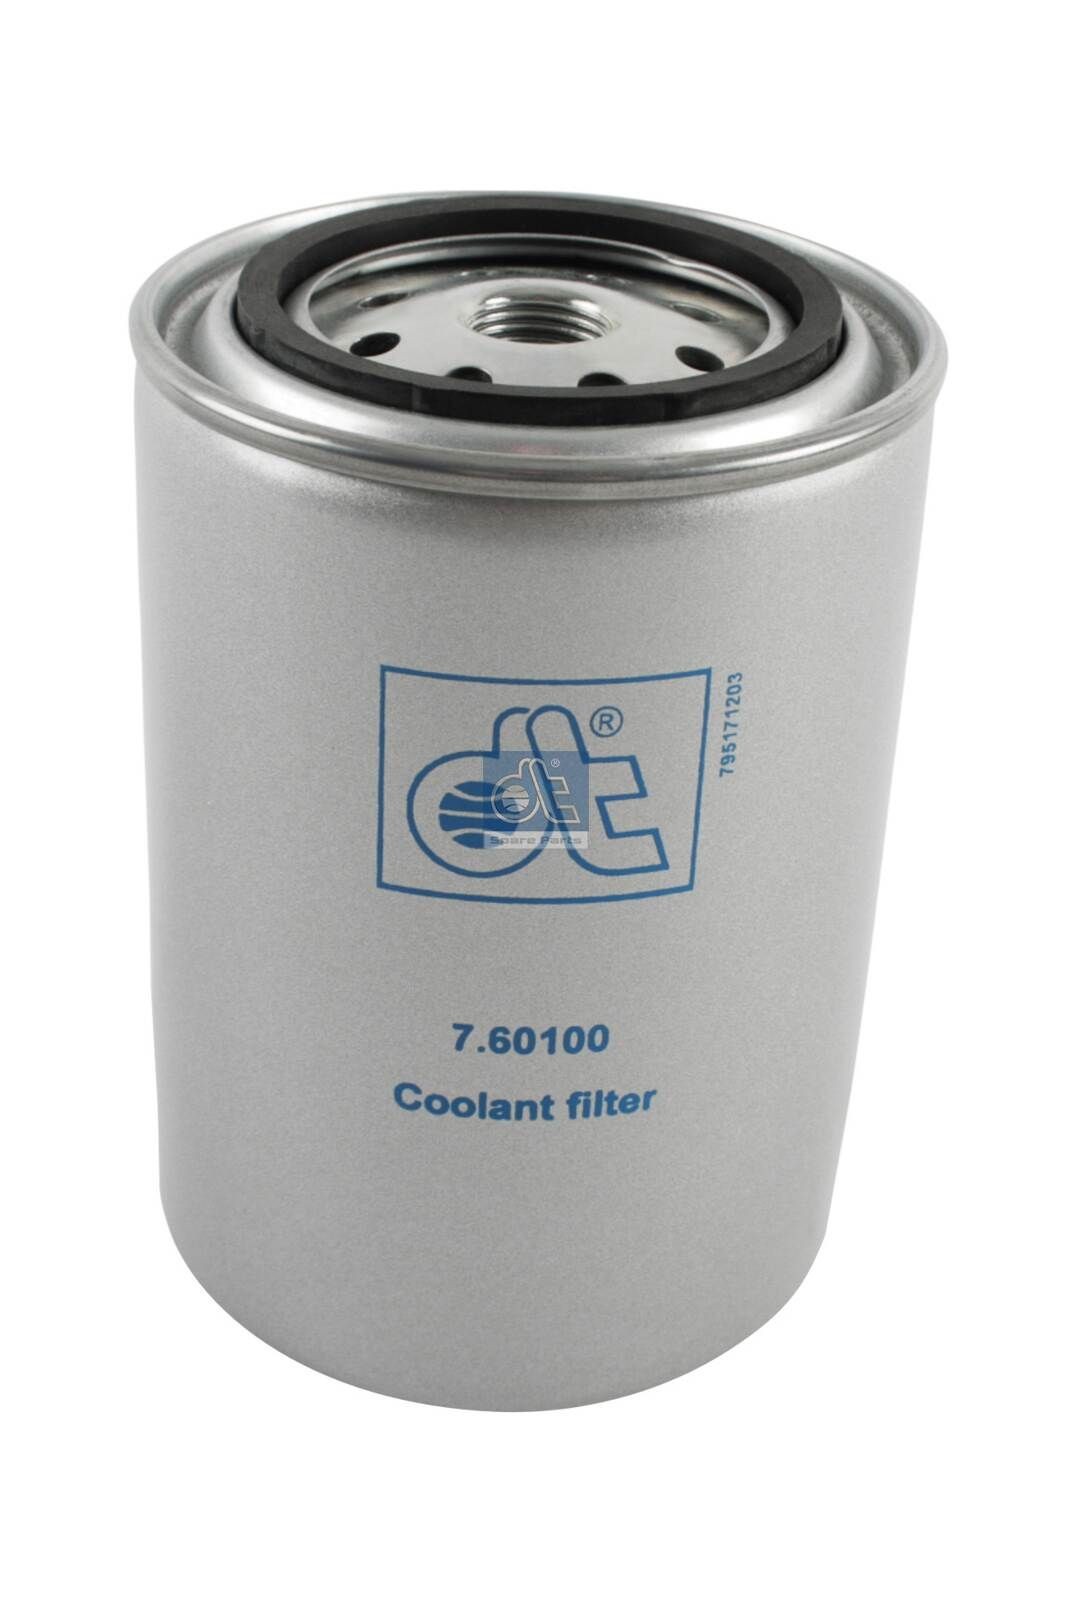 WA 940/6 DT Spare Parts 7.60100 Coolant Filter 9N-3719